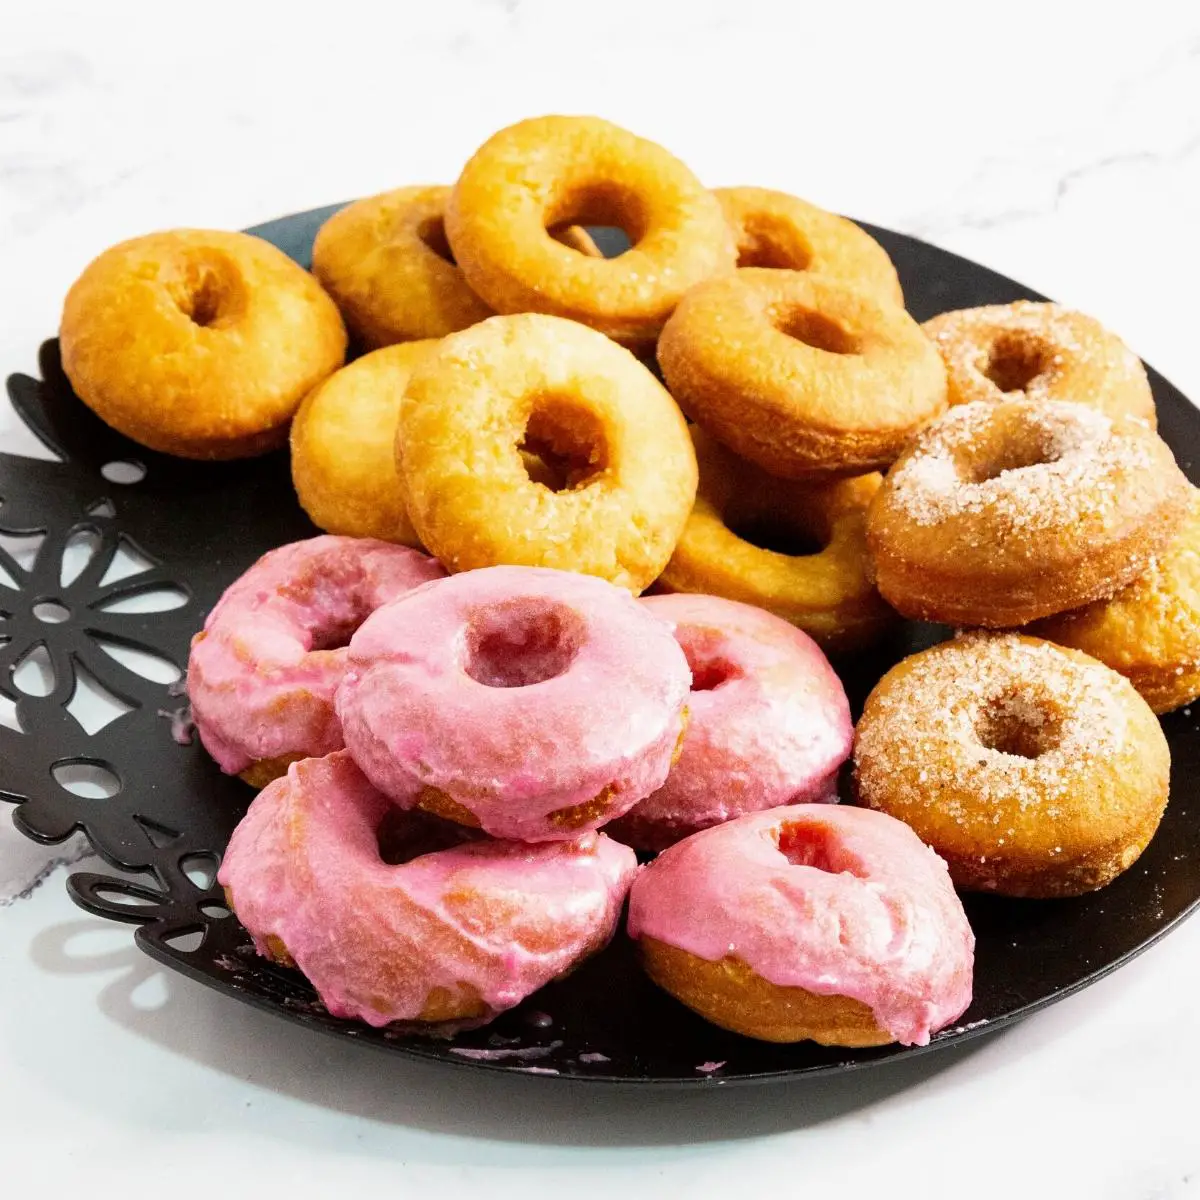 A plate with sugar glazed donuts.